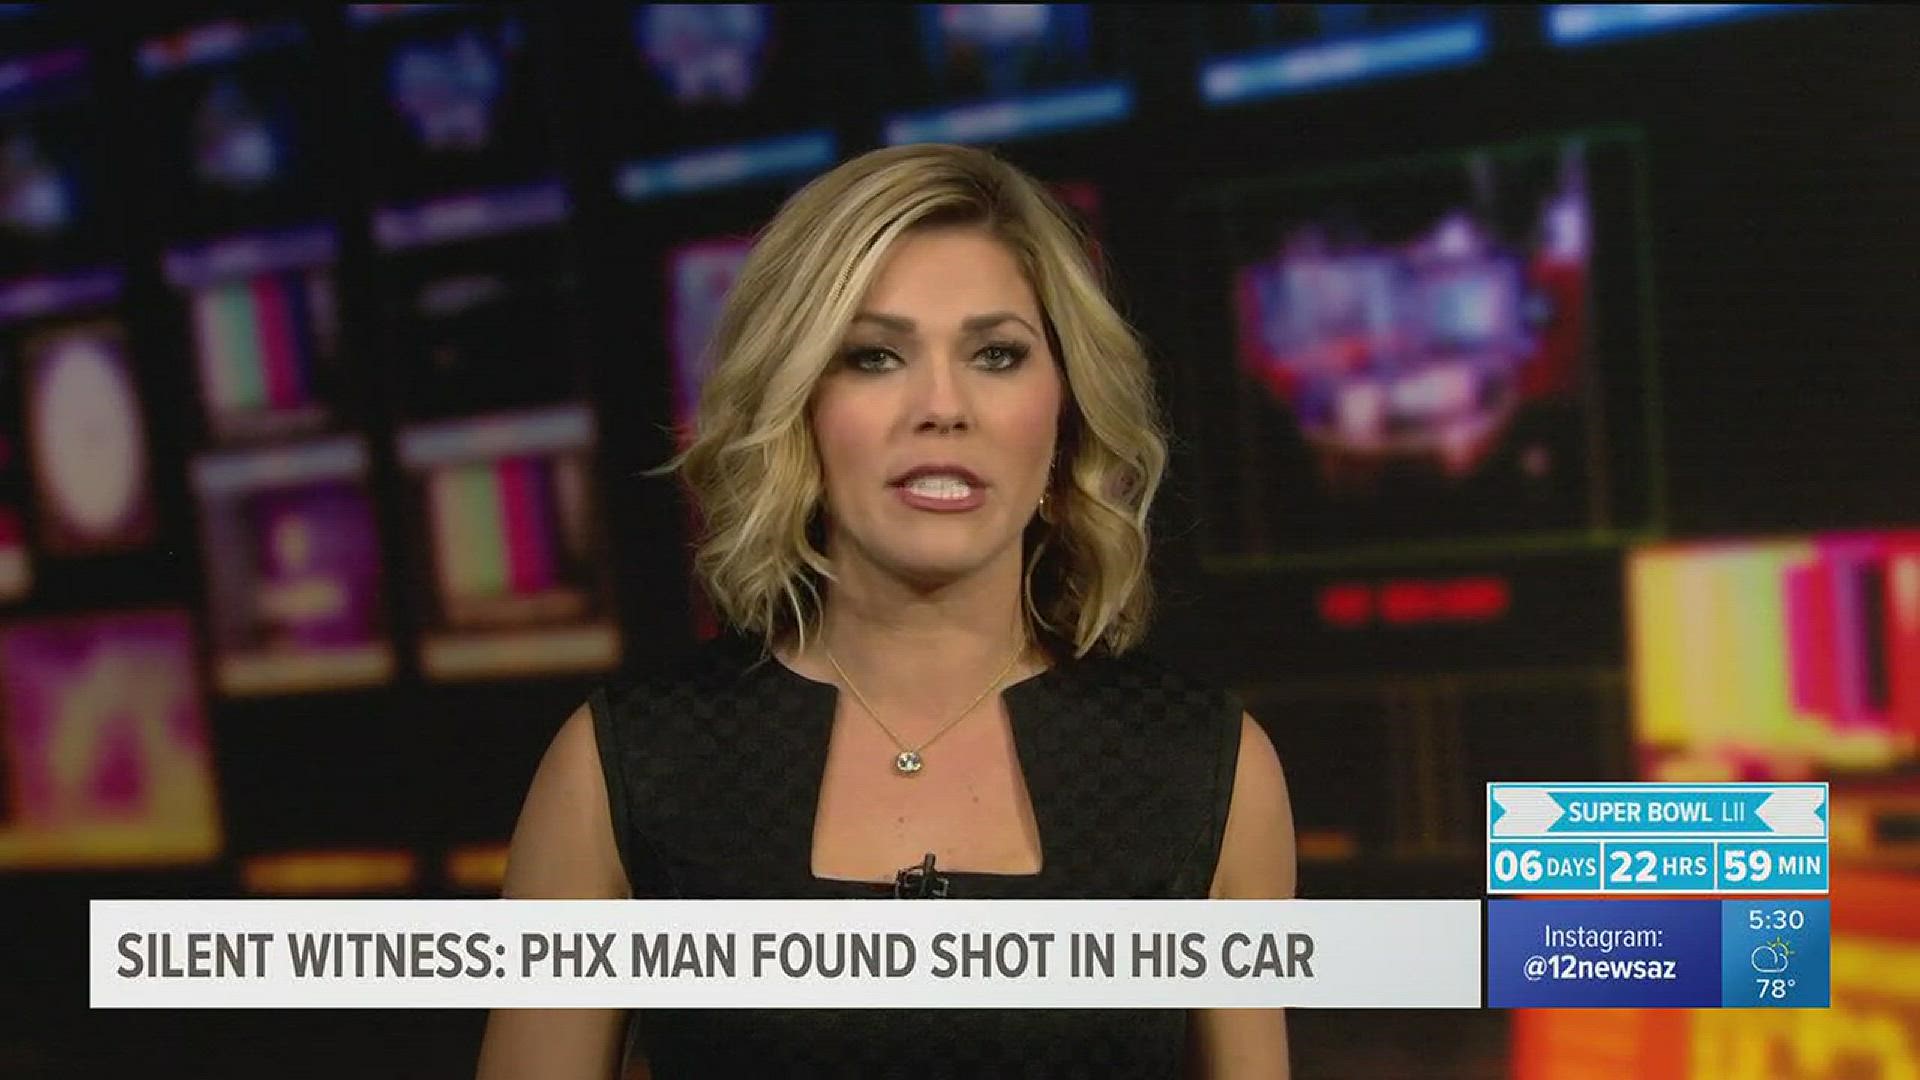 A man was found shot dead inside of his car in Phoenix and now his family is teaming with Silent Witness to find the person responsible.